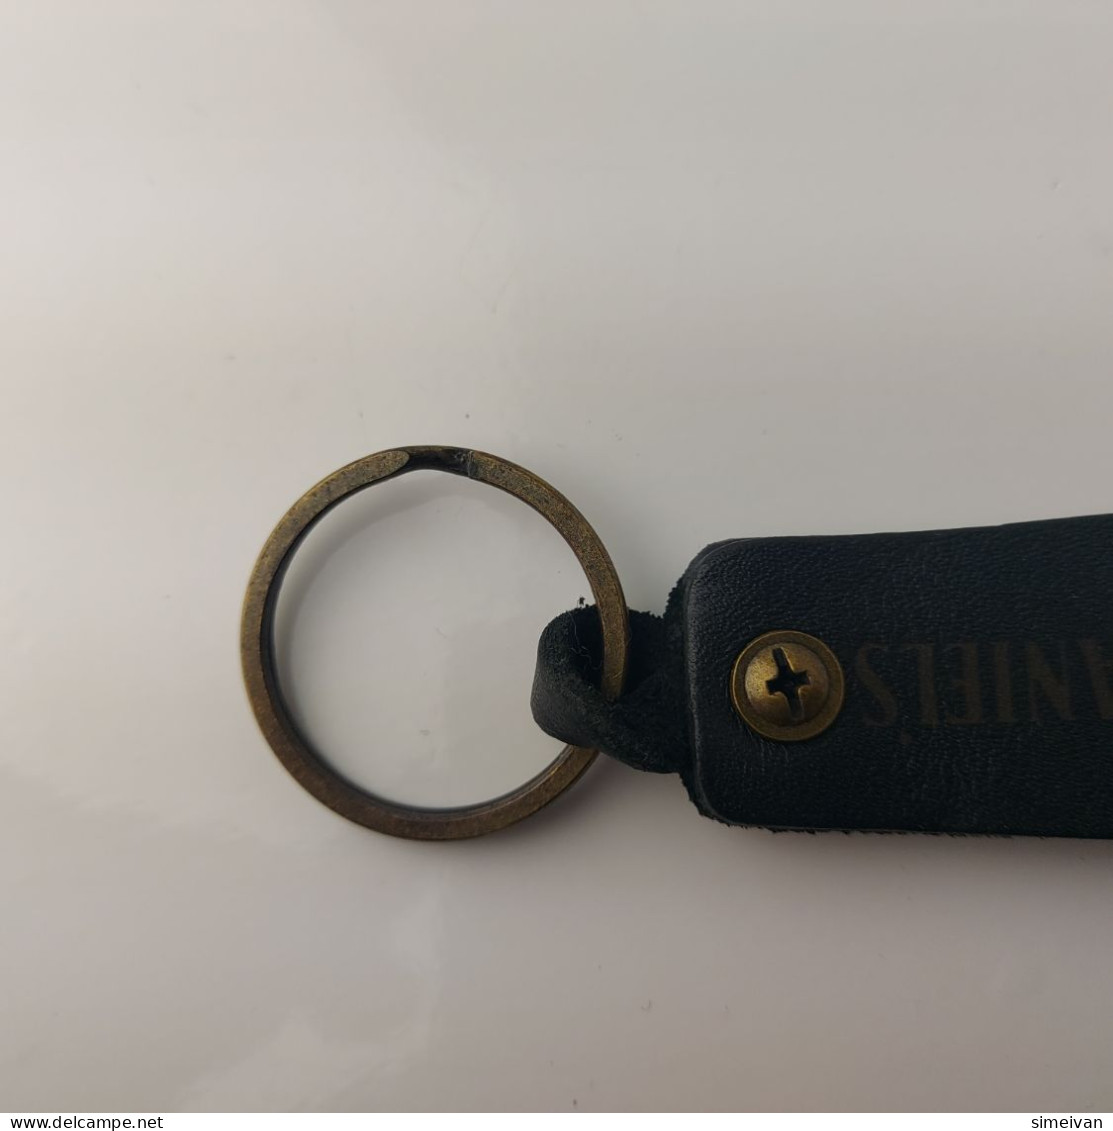 Jack Daniel's Whiskey Collectible Black Leather Key Ring Keychain #5560